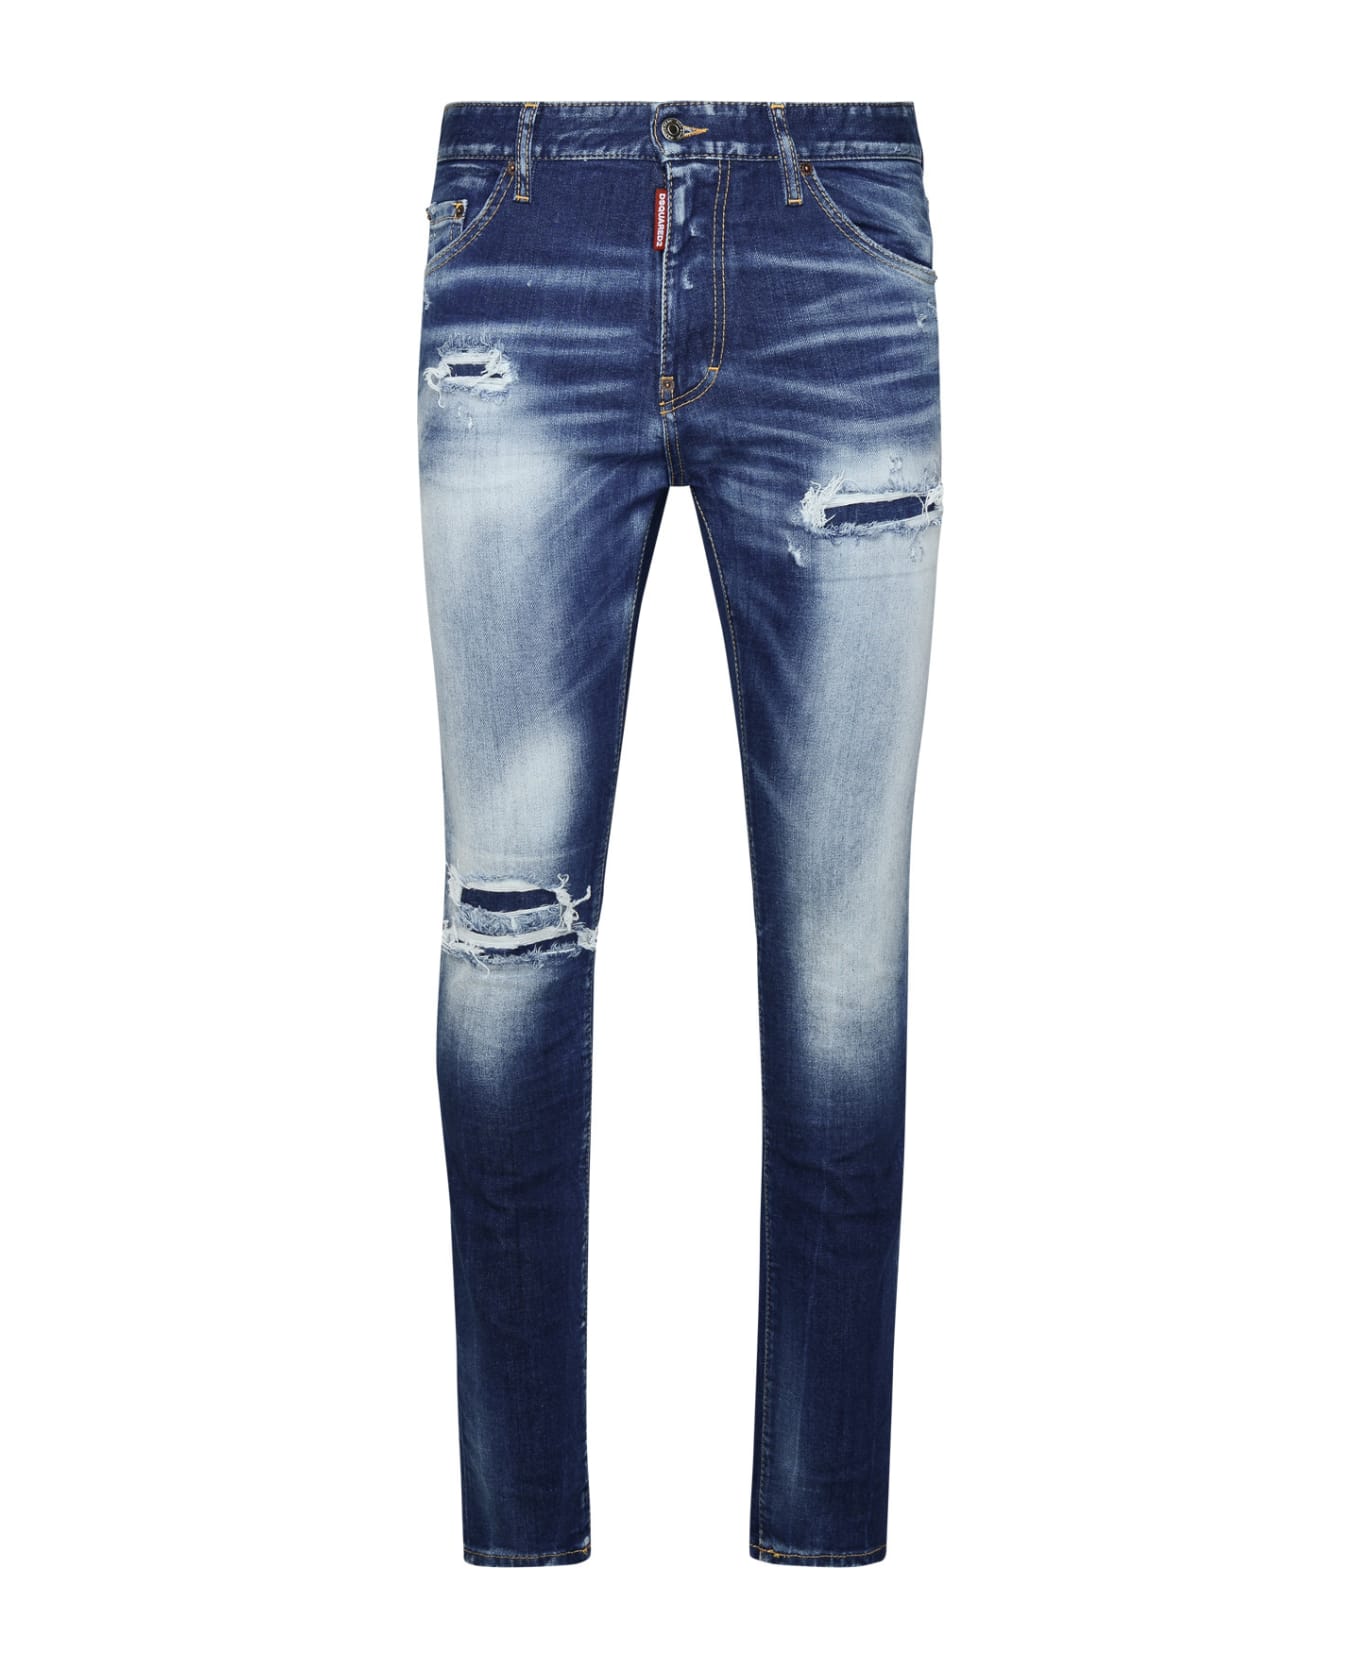 Dsquared2 Cool Guy Jean Jeans - 470